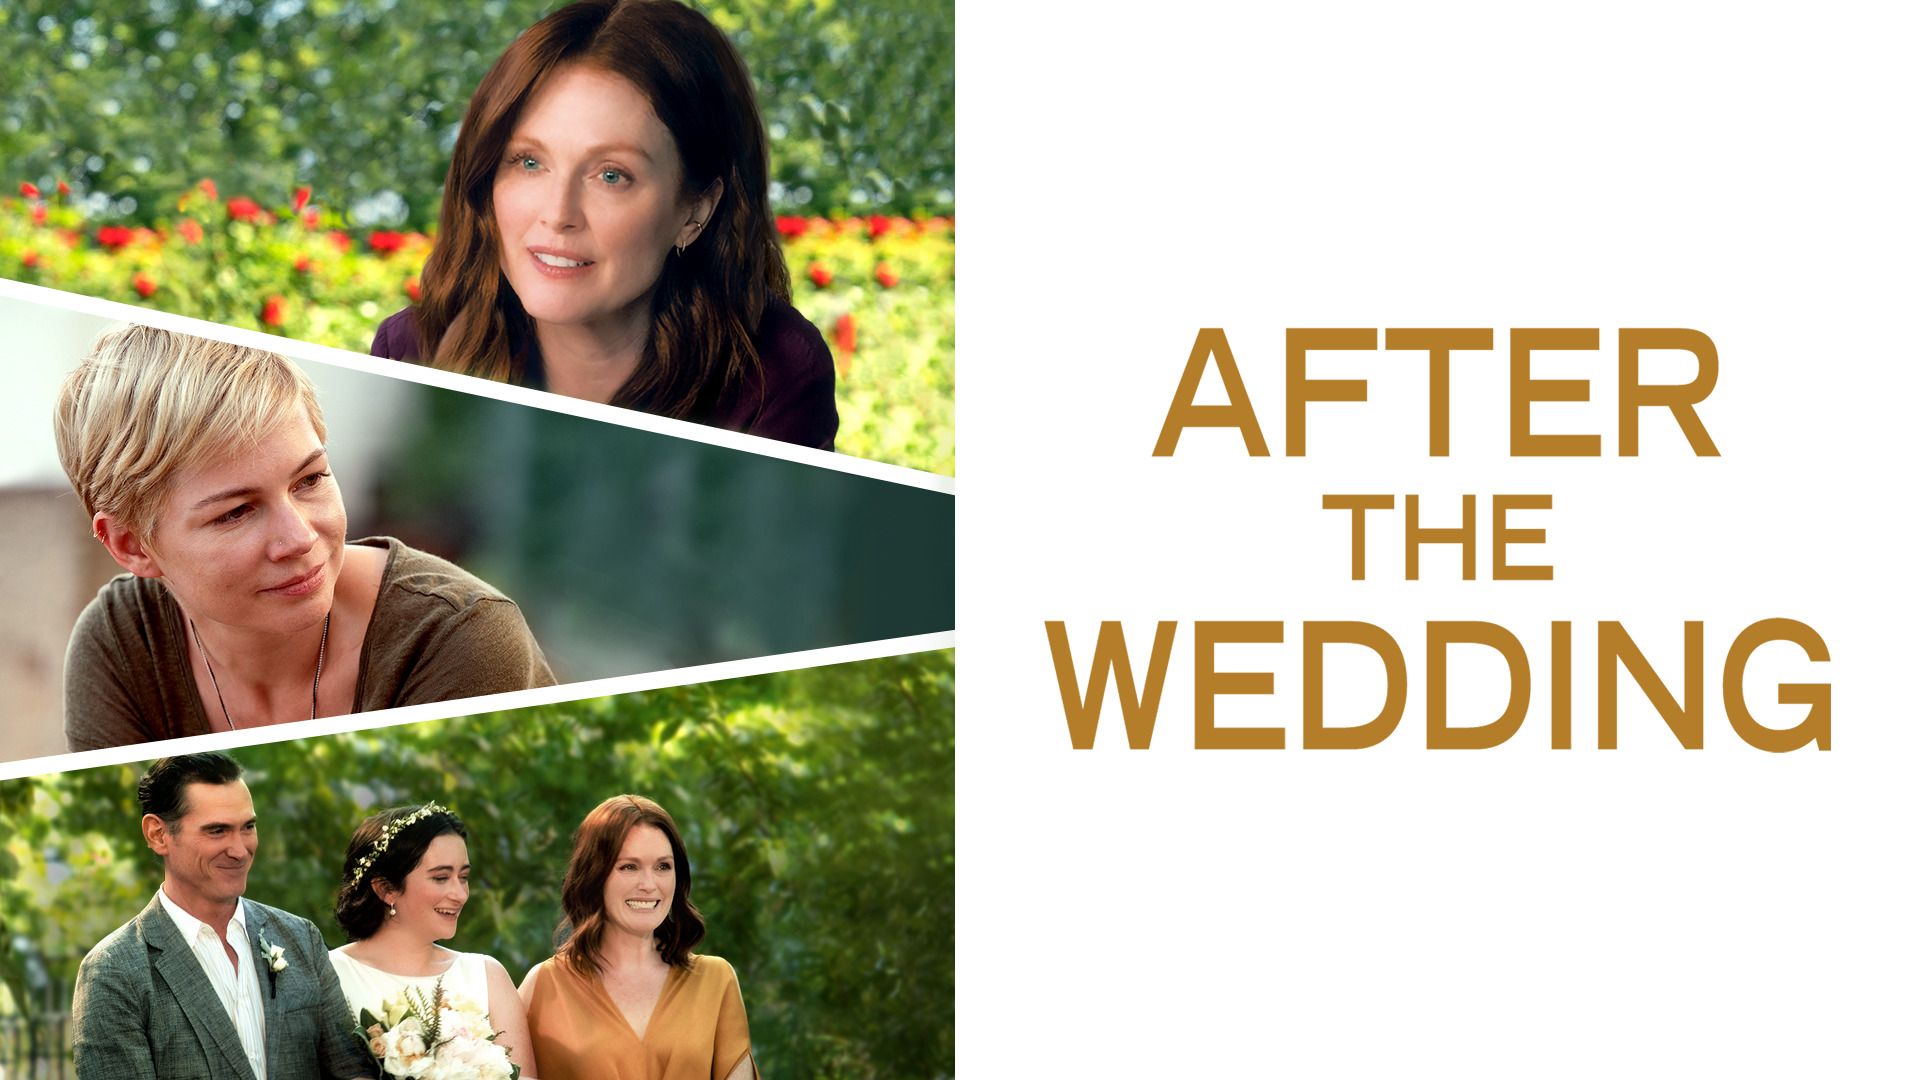 41-facts-about-the-movie-after-the-wedding